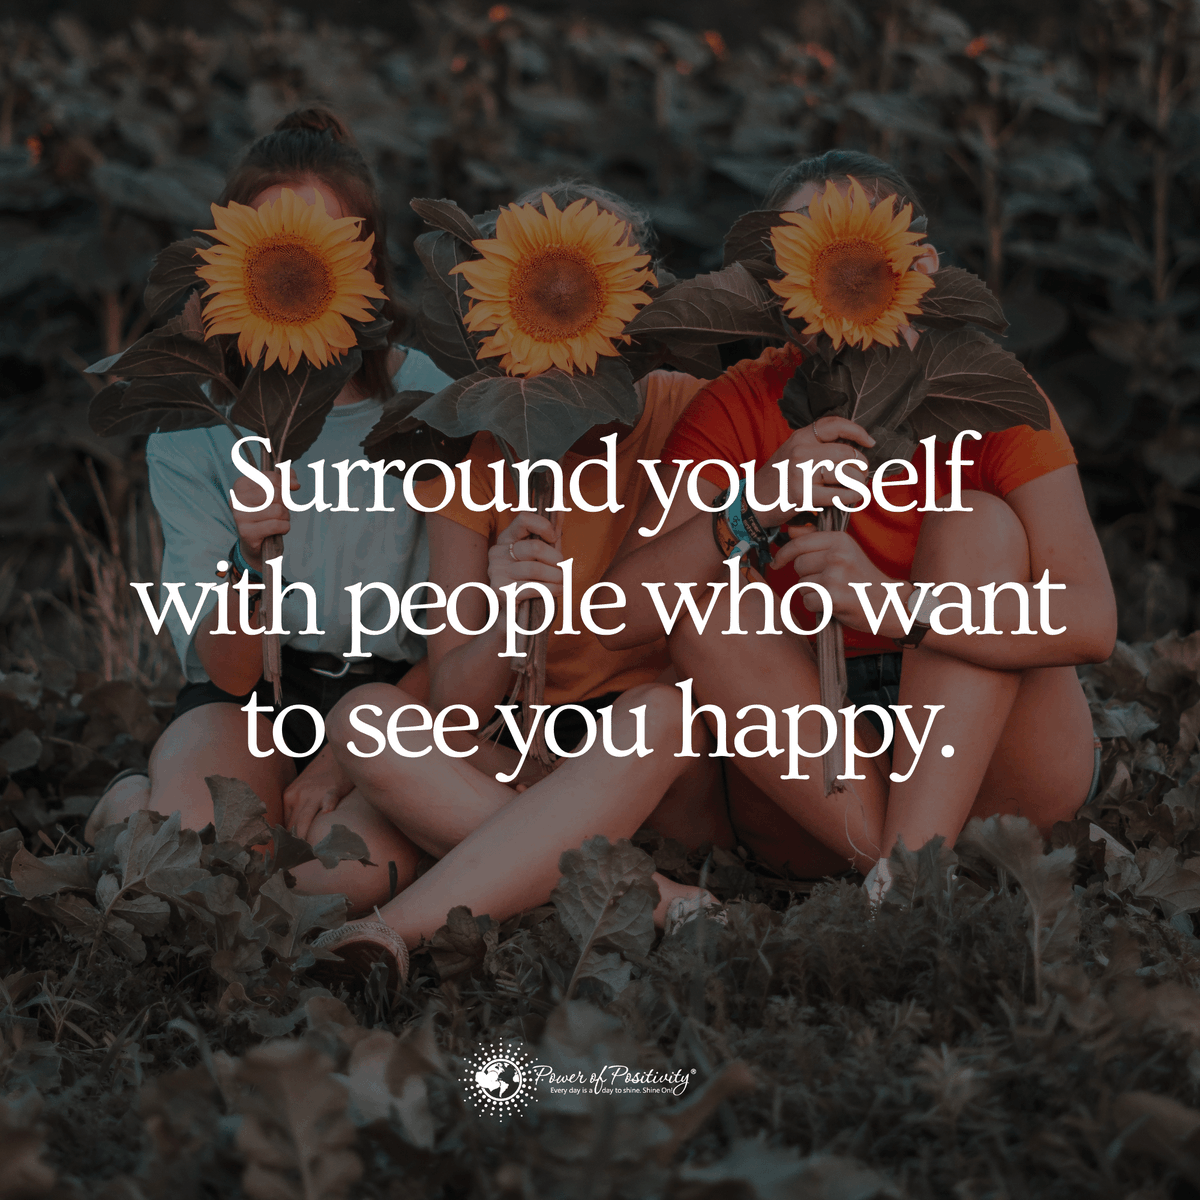 Surround yourself with people who want to see you happy.